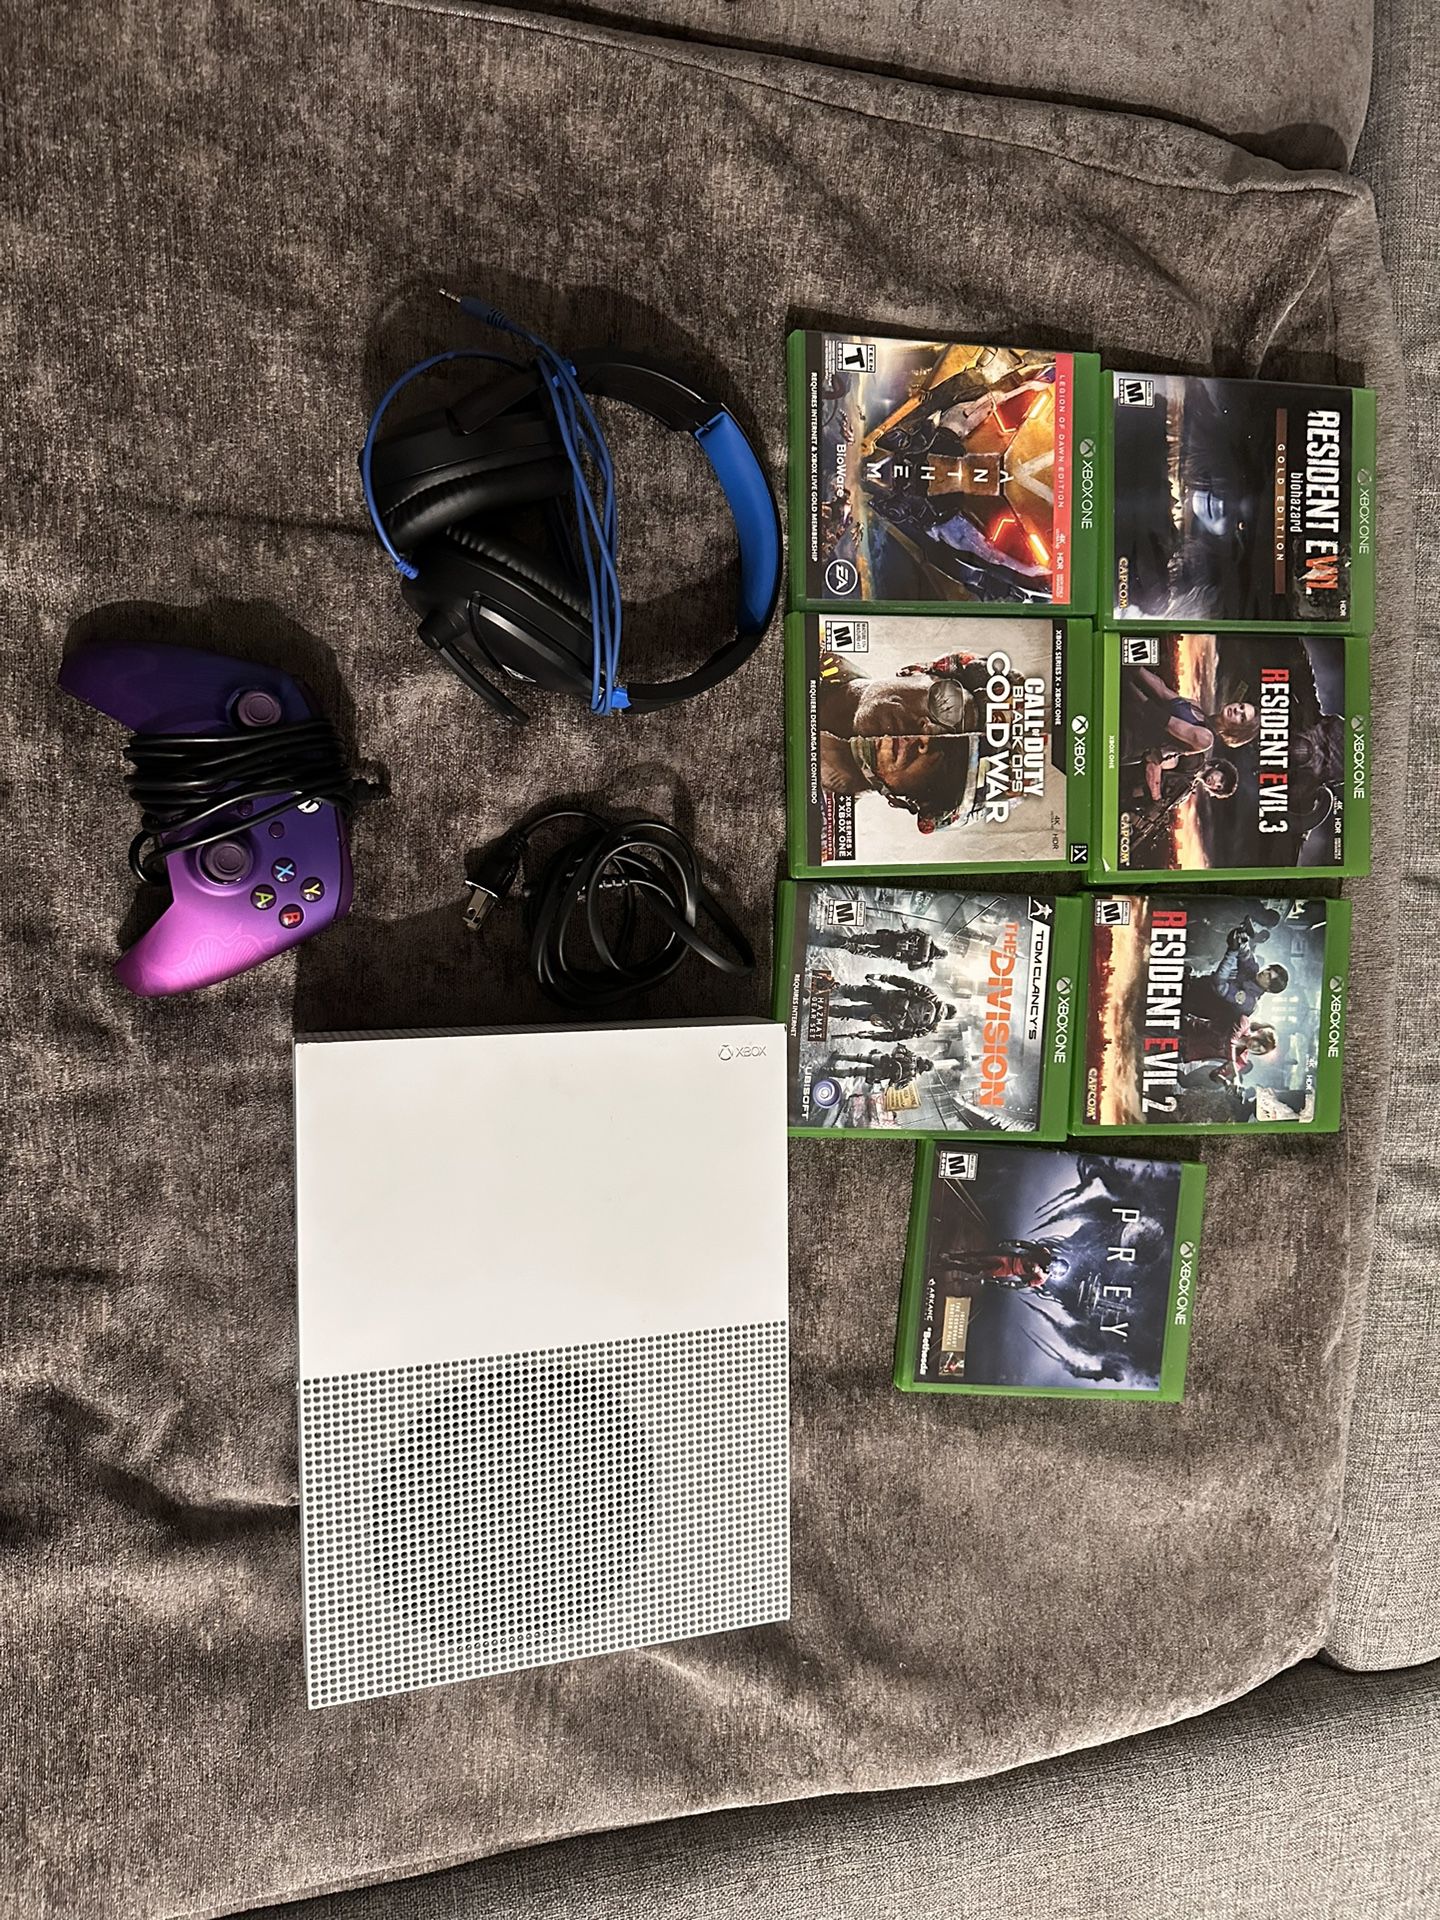 Xbox One S With Games, Headphones, Control